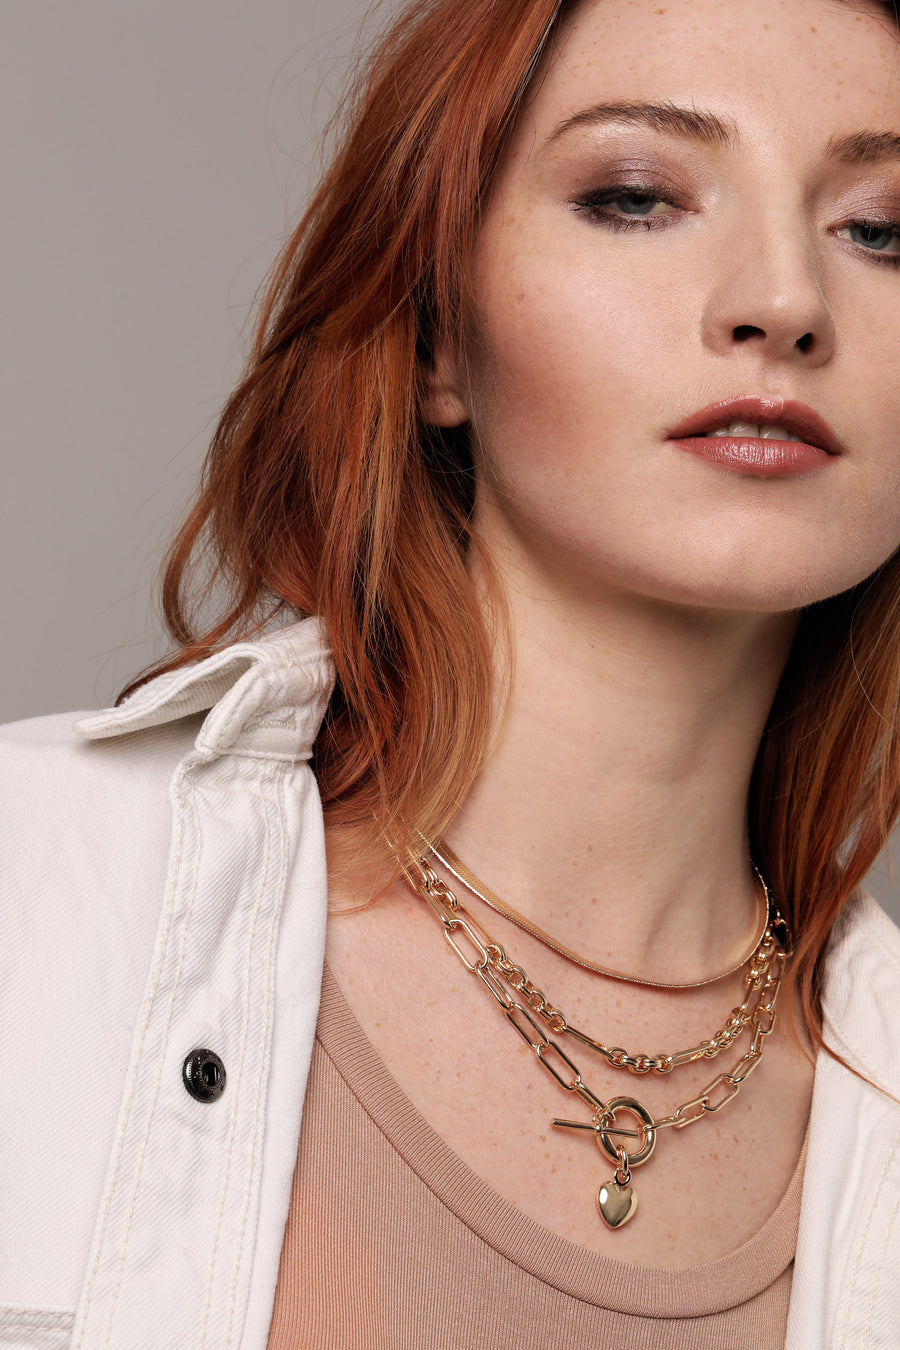 gold heart layered necklace chain